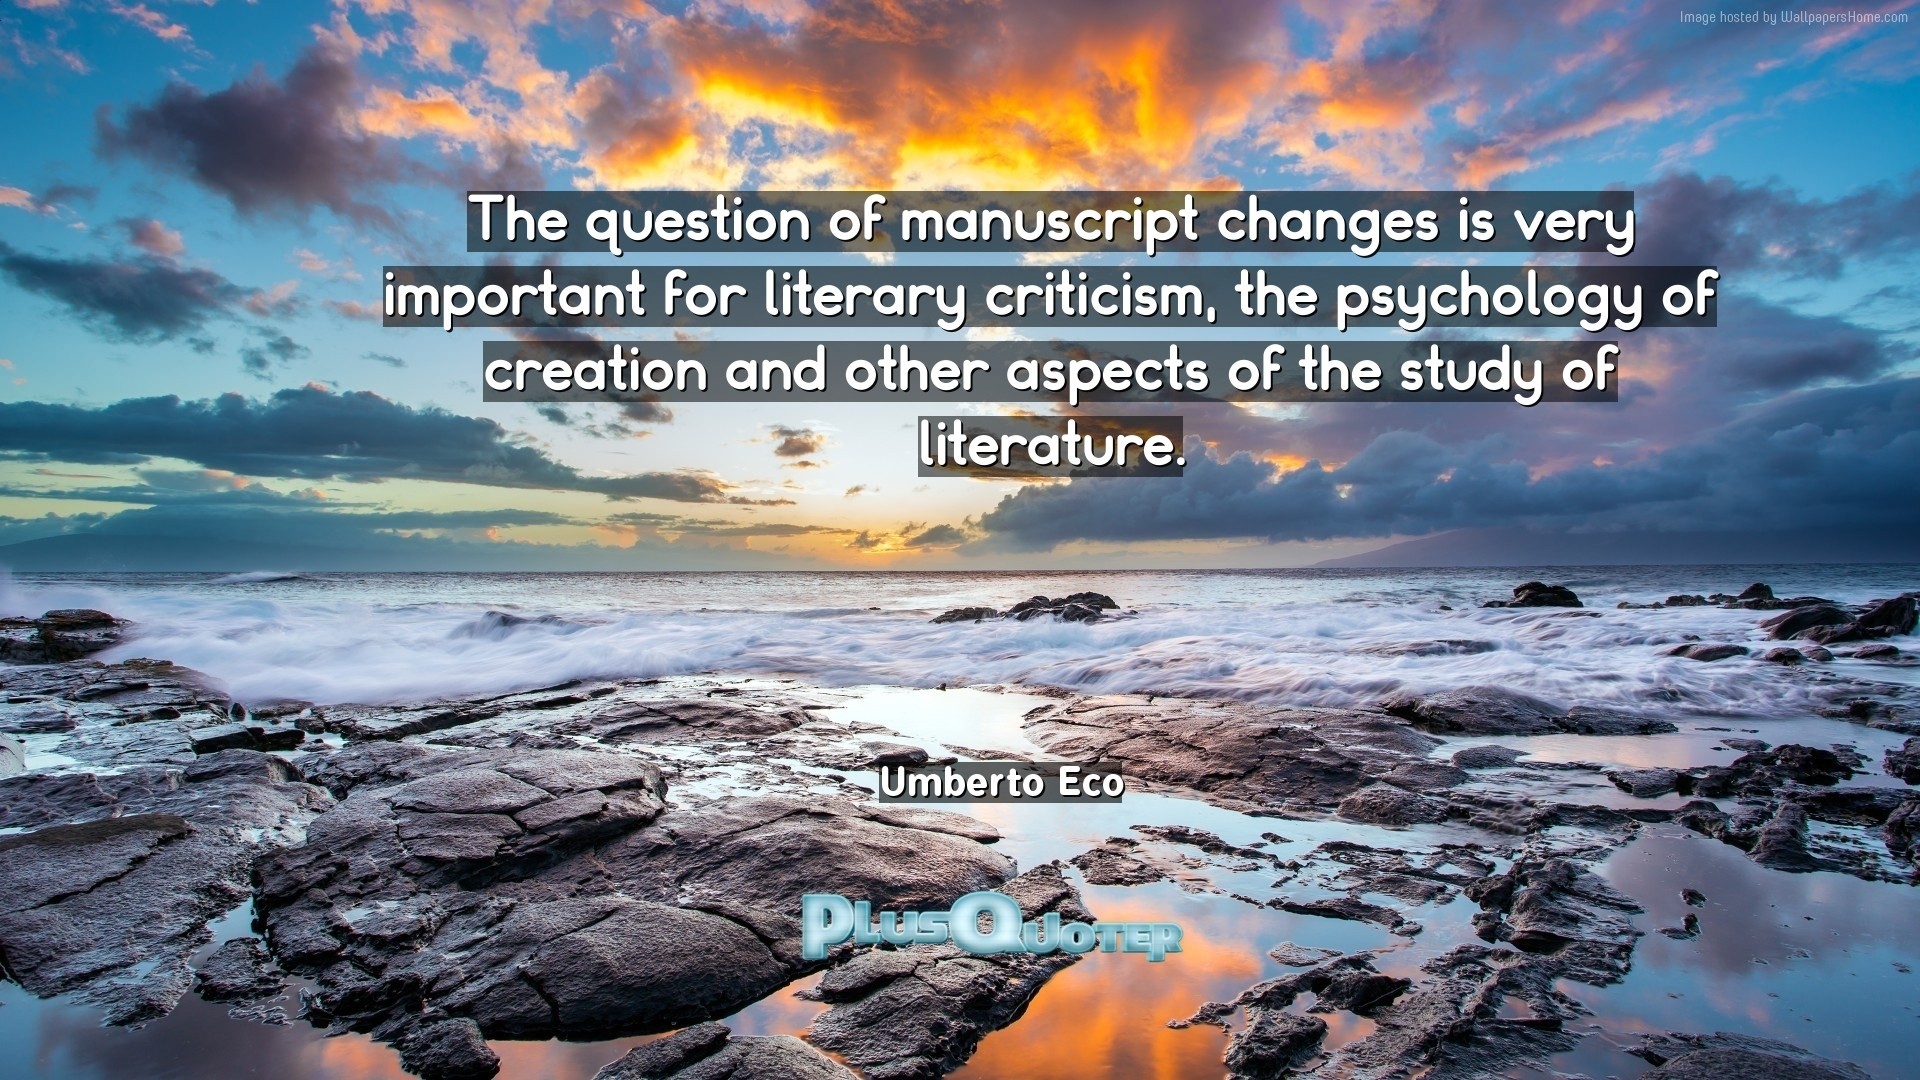 1920x1080 Download Wallpaper with inspirational Quotes- "The question of manuscript  changes is very important for